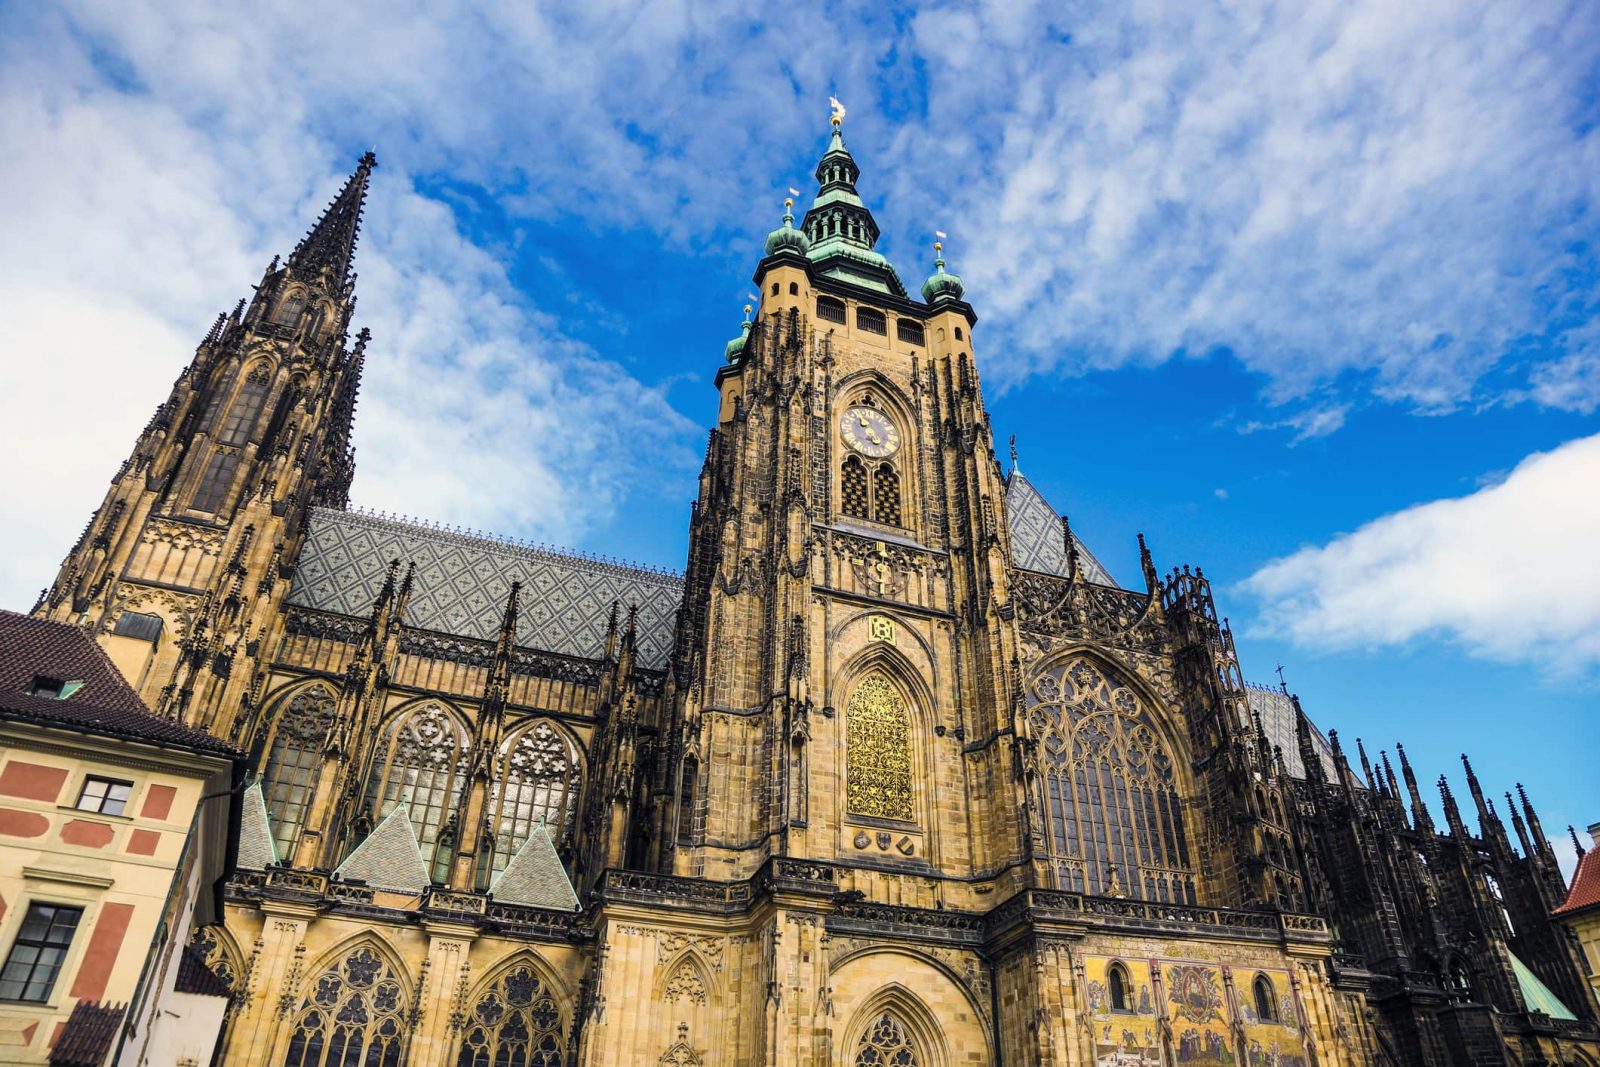 Wide angle shot of famous St. Vitus Cathedral (Prague, Czech Republic)